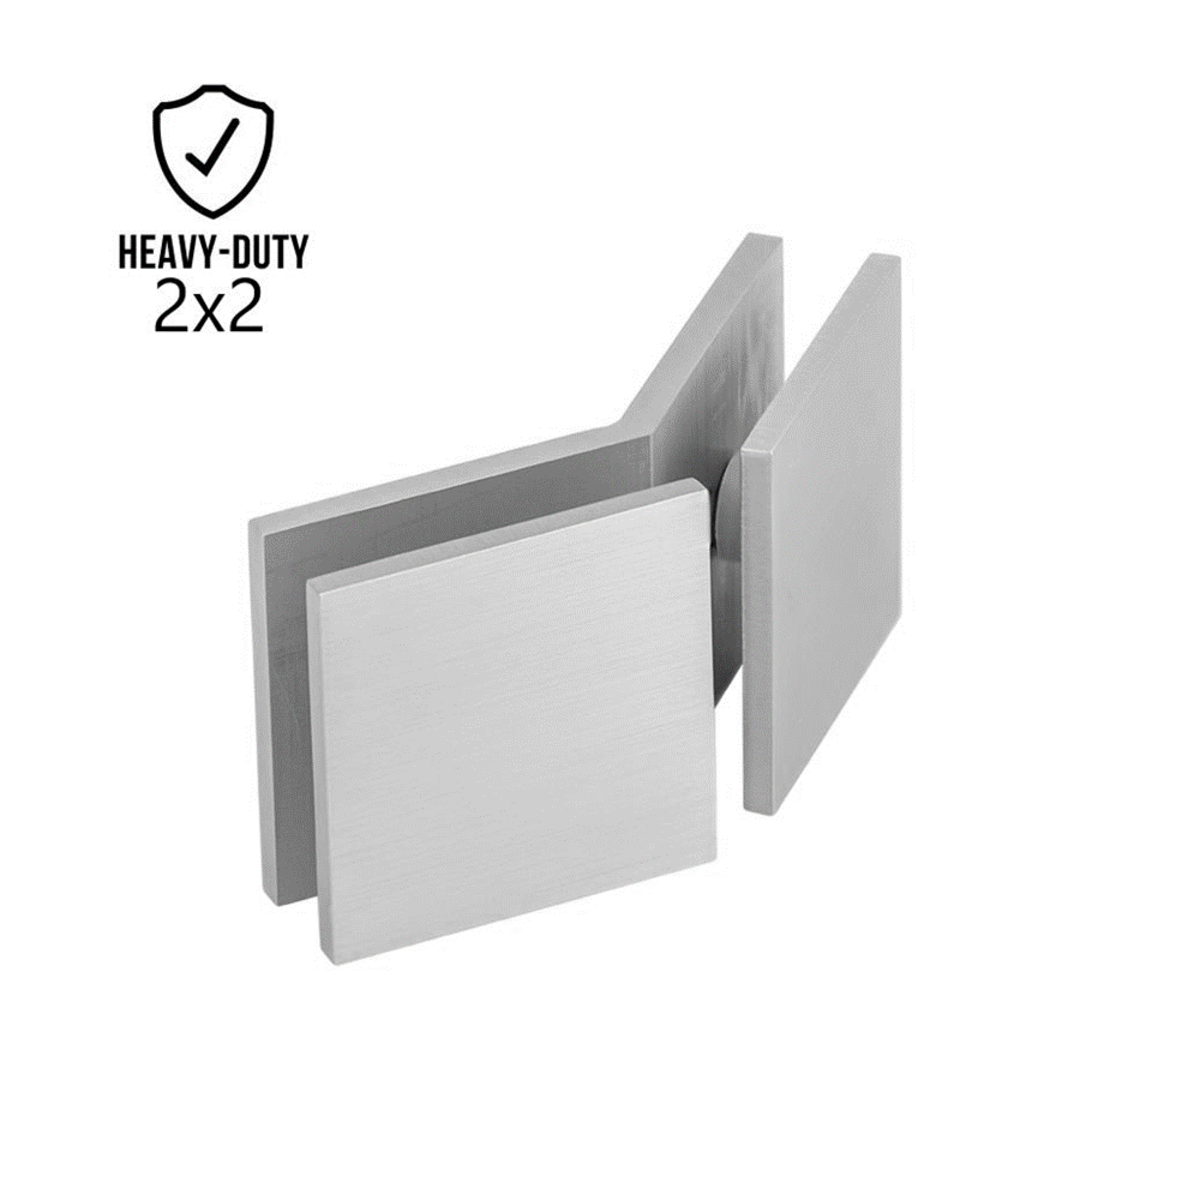 2" x 2" 135° Heavy Duty Glass to Glass Square Edges Glass Clamp